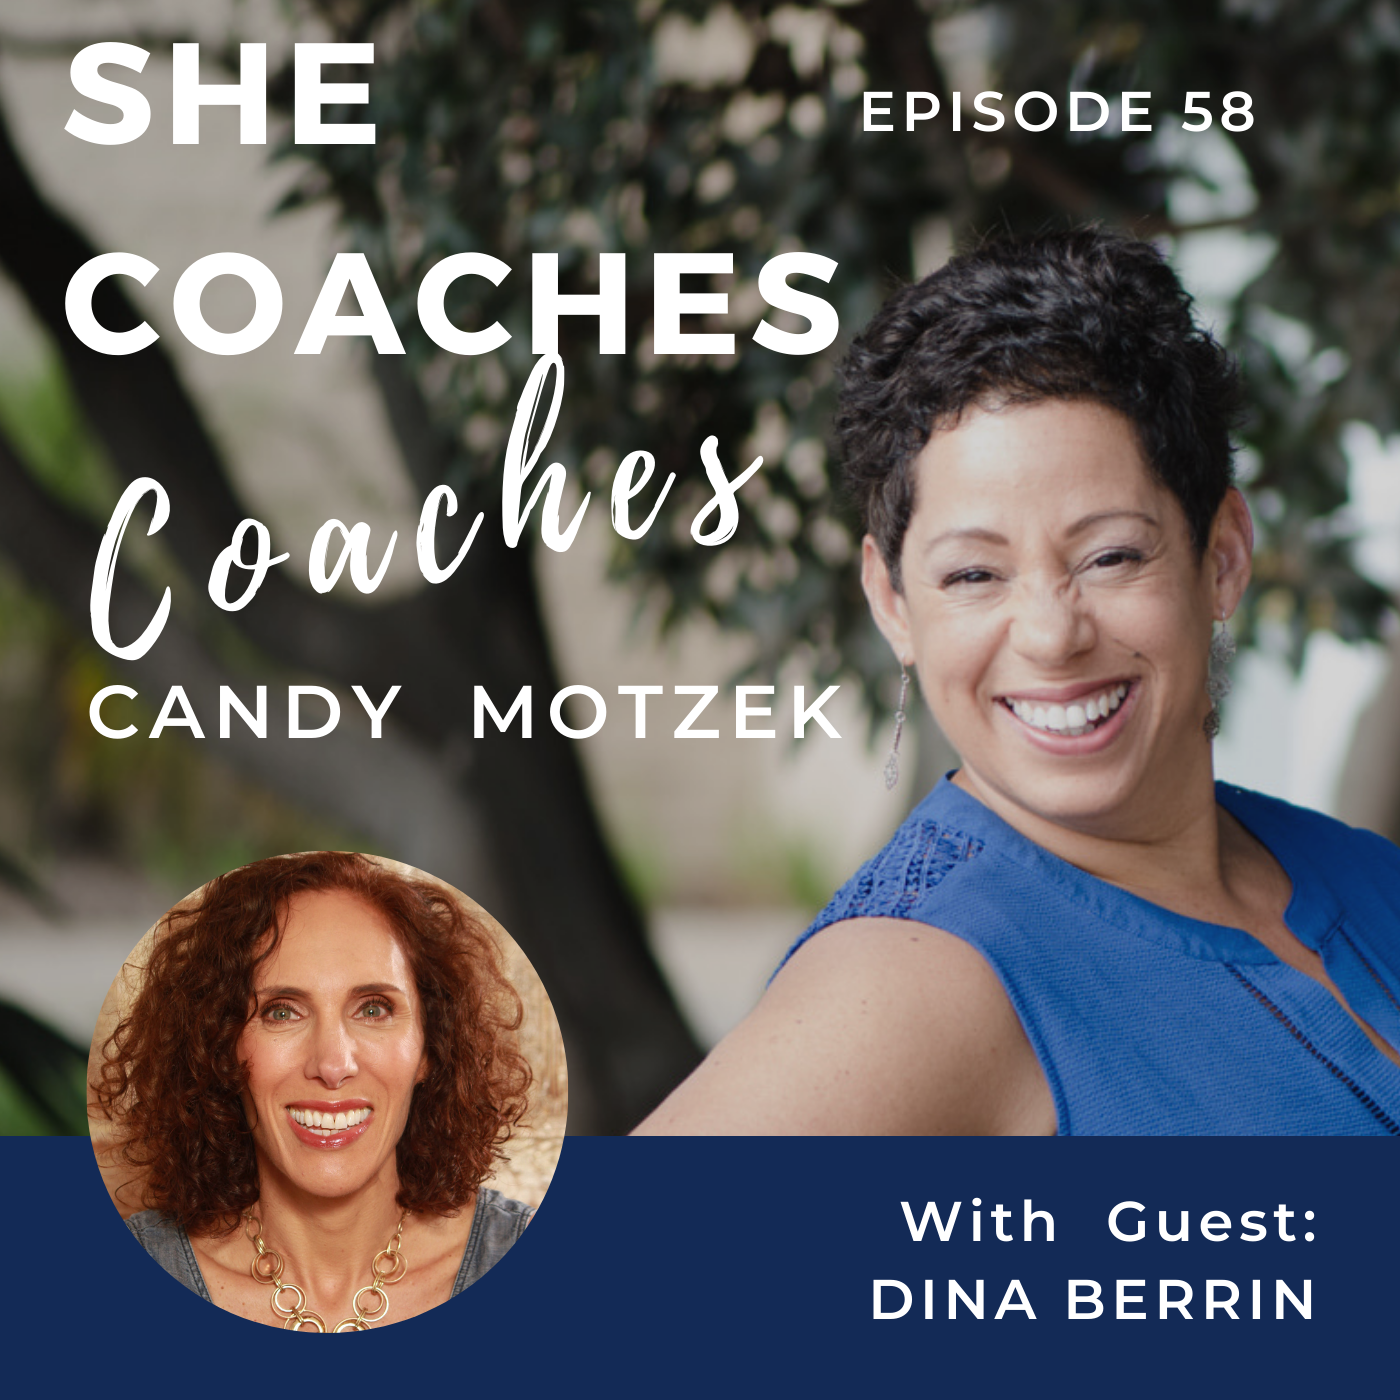 Combine Tarot and Coaching To Add Depth To Your Work with Guest Dina Berrin – Ep: 058